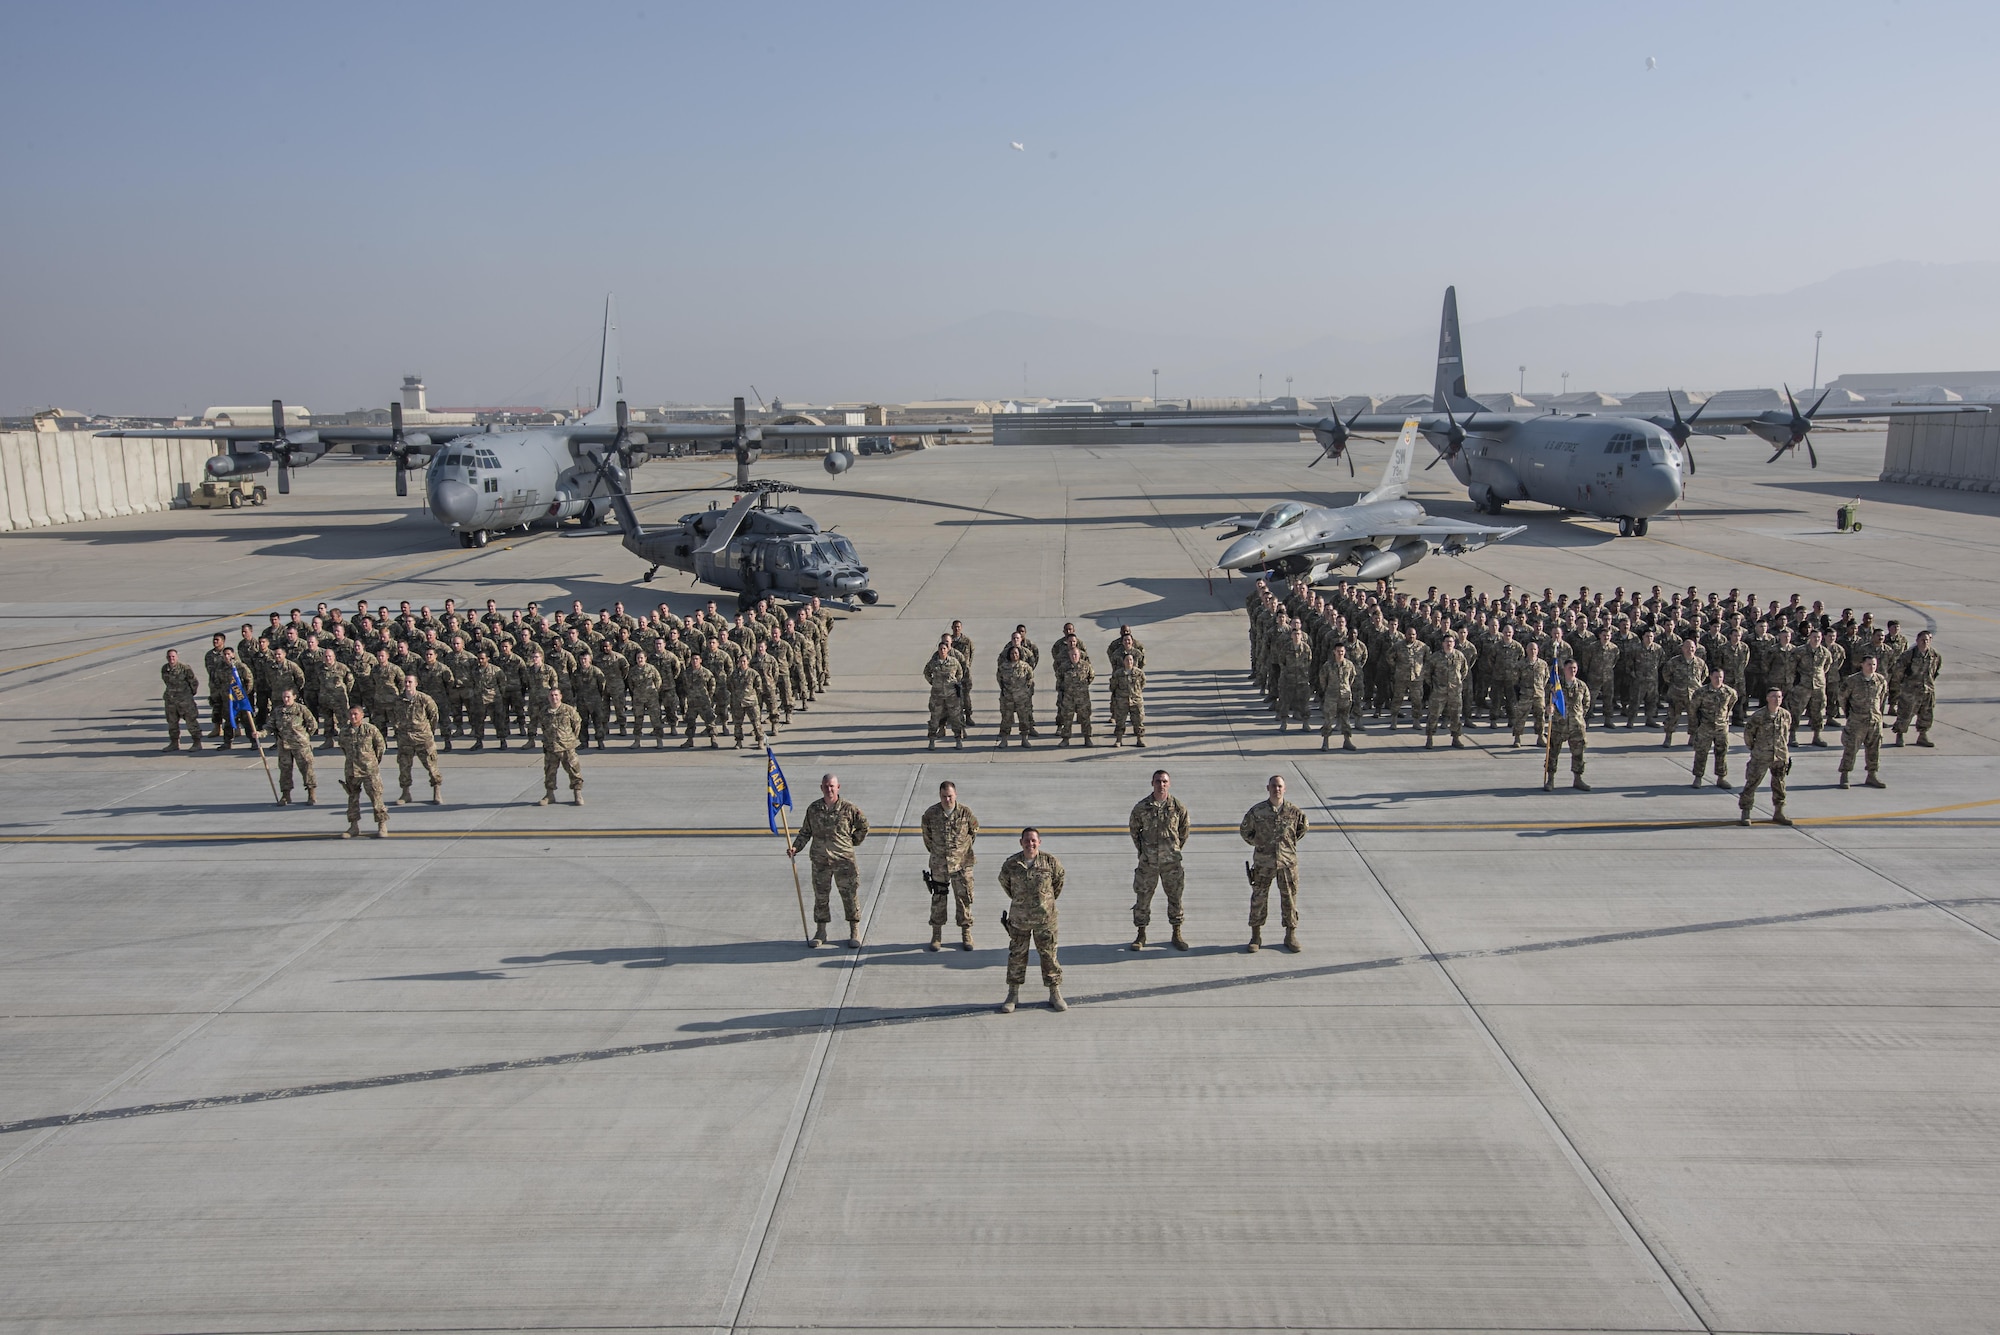 Fifty maintainers from the 920th Maintenance Group have won the 2016 Maintenance Effectiveness Award at the major command level. The award is the highest level of squadron recognition in the Air Force maintenance career field. Air Combat Command awarded the 2016 MEA to the 455th Expeditionary Aircraft Maintenance Squadron, Bagram Air Base, Afghanistan, a unit to which members of the 920th MXG were deployed from September 2016 to February 2017. (U.S. Air Force photo / Staff Sgt. Katherine Spessa)
